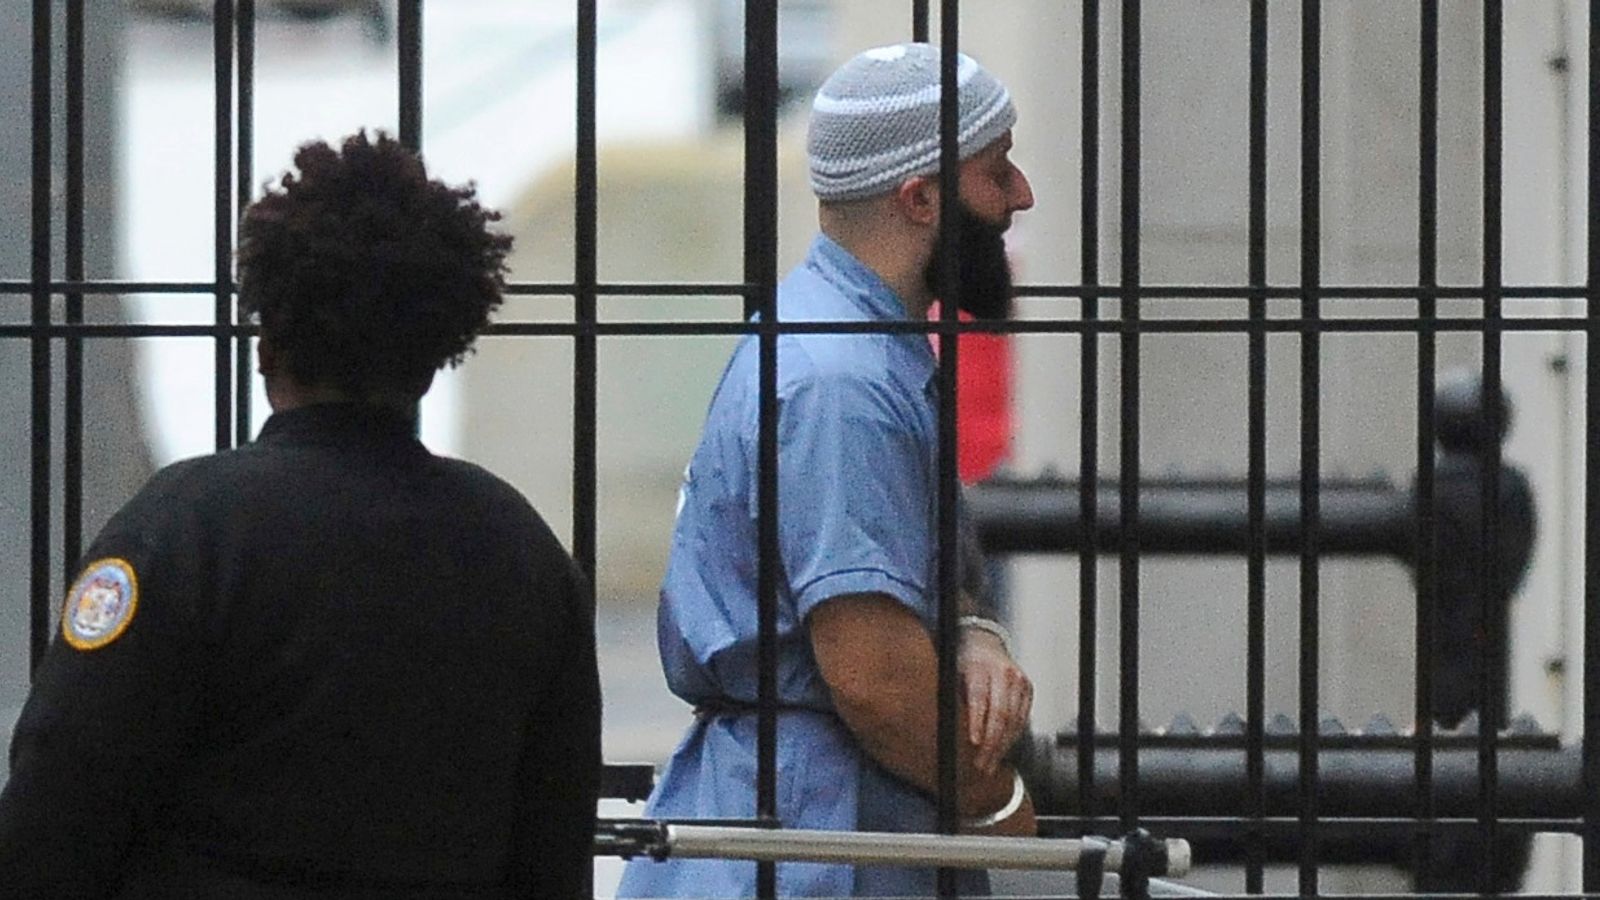 adnan-syed-charges-against-subject-of-hit-podcast-serial-dropped-weeks-after-conviction